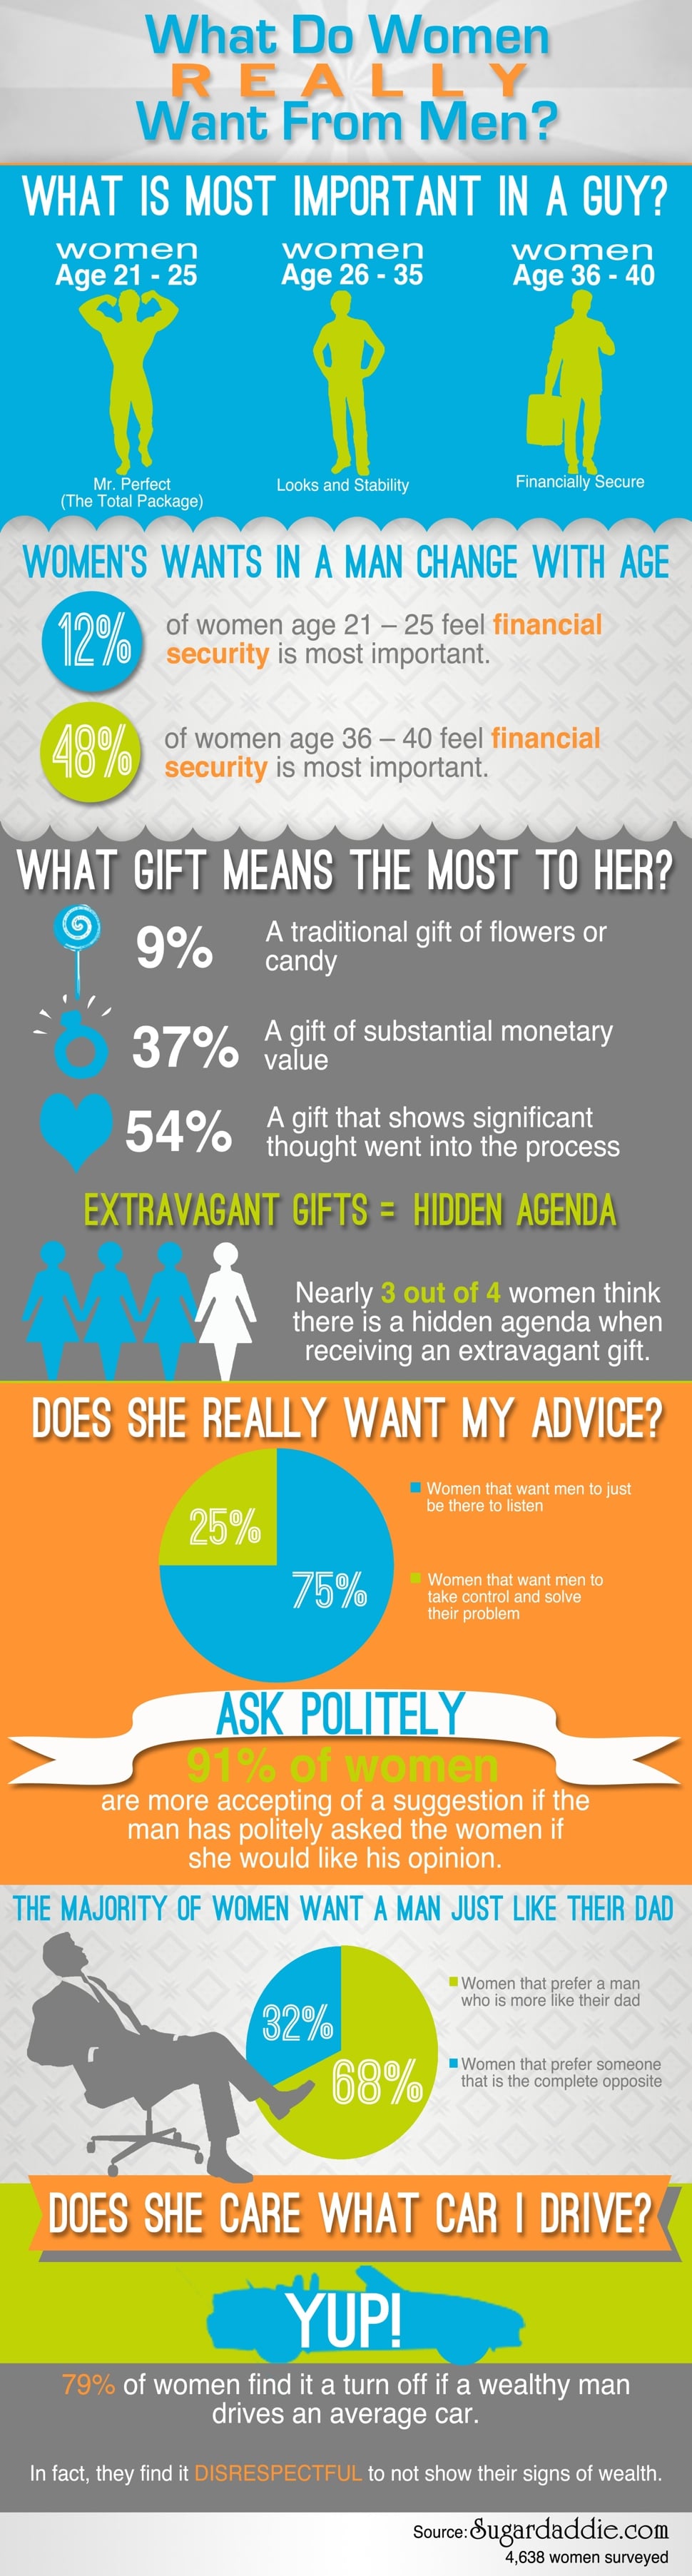 What Do Women Really Want From Men - Infographic